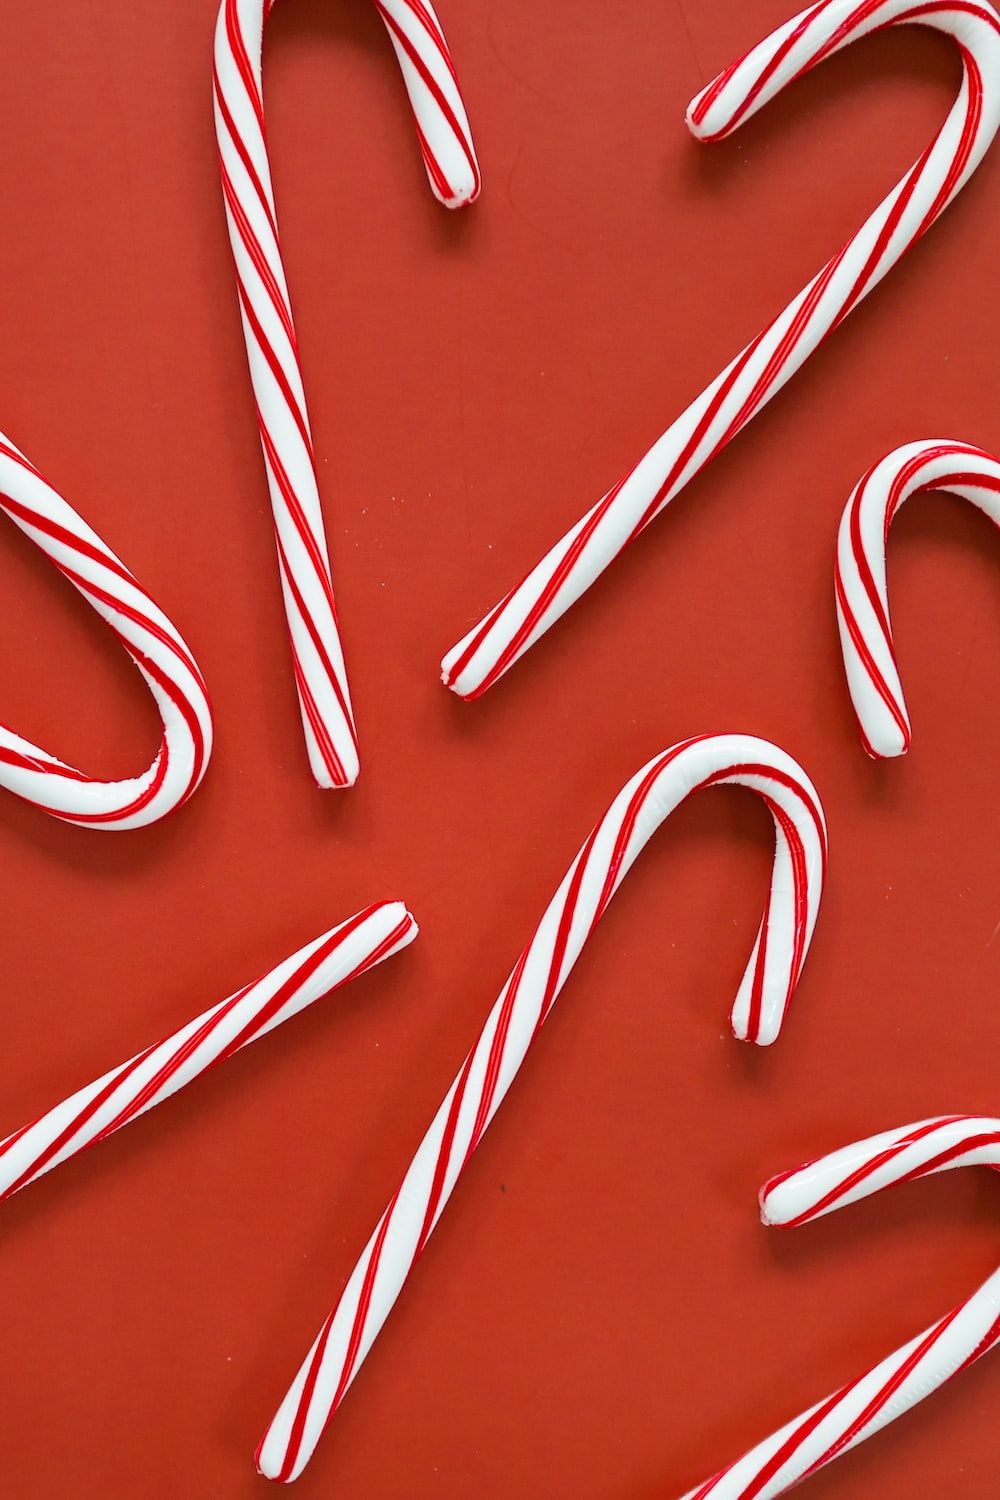 Candy Cane Picture. Download Free Image